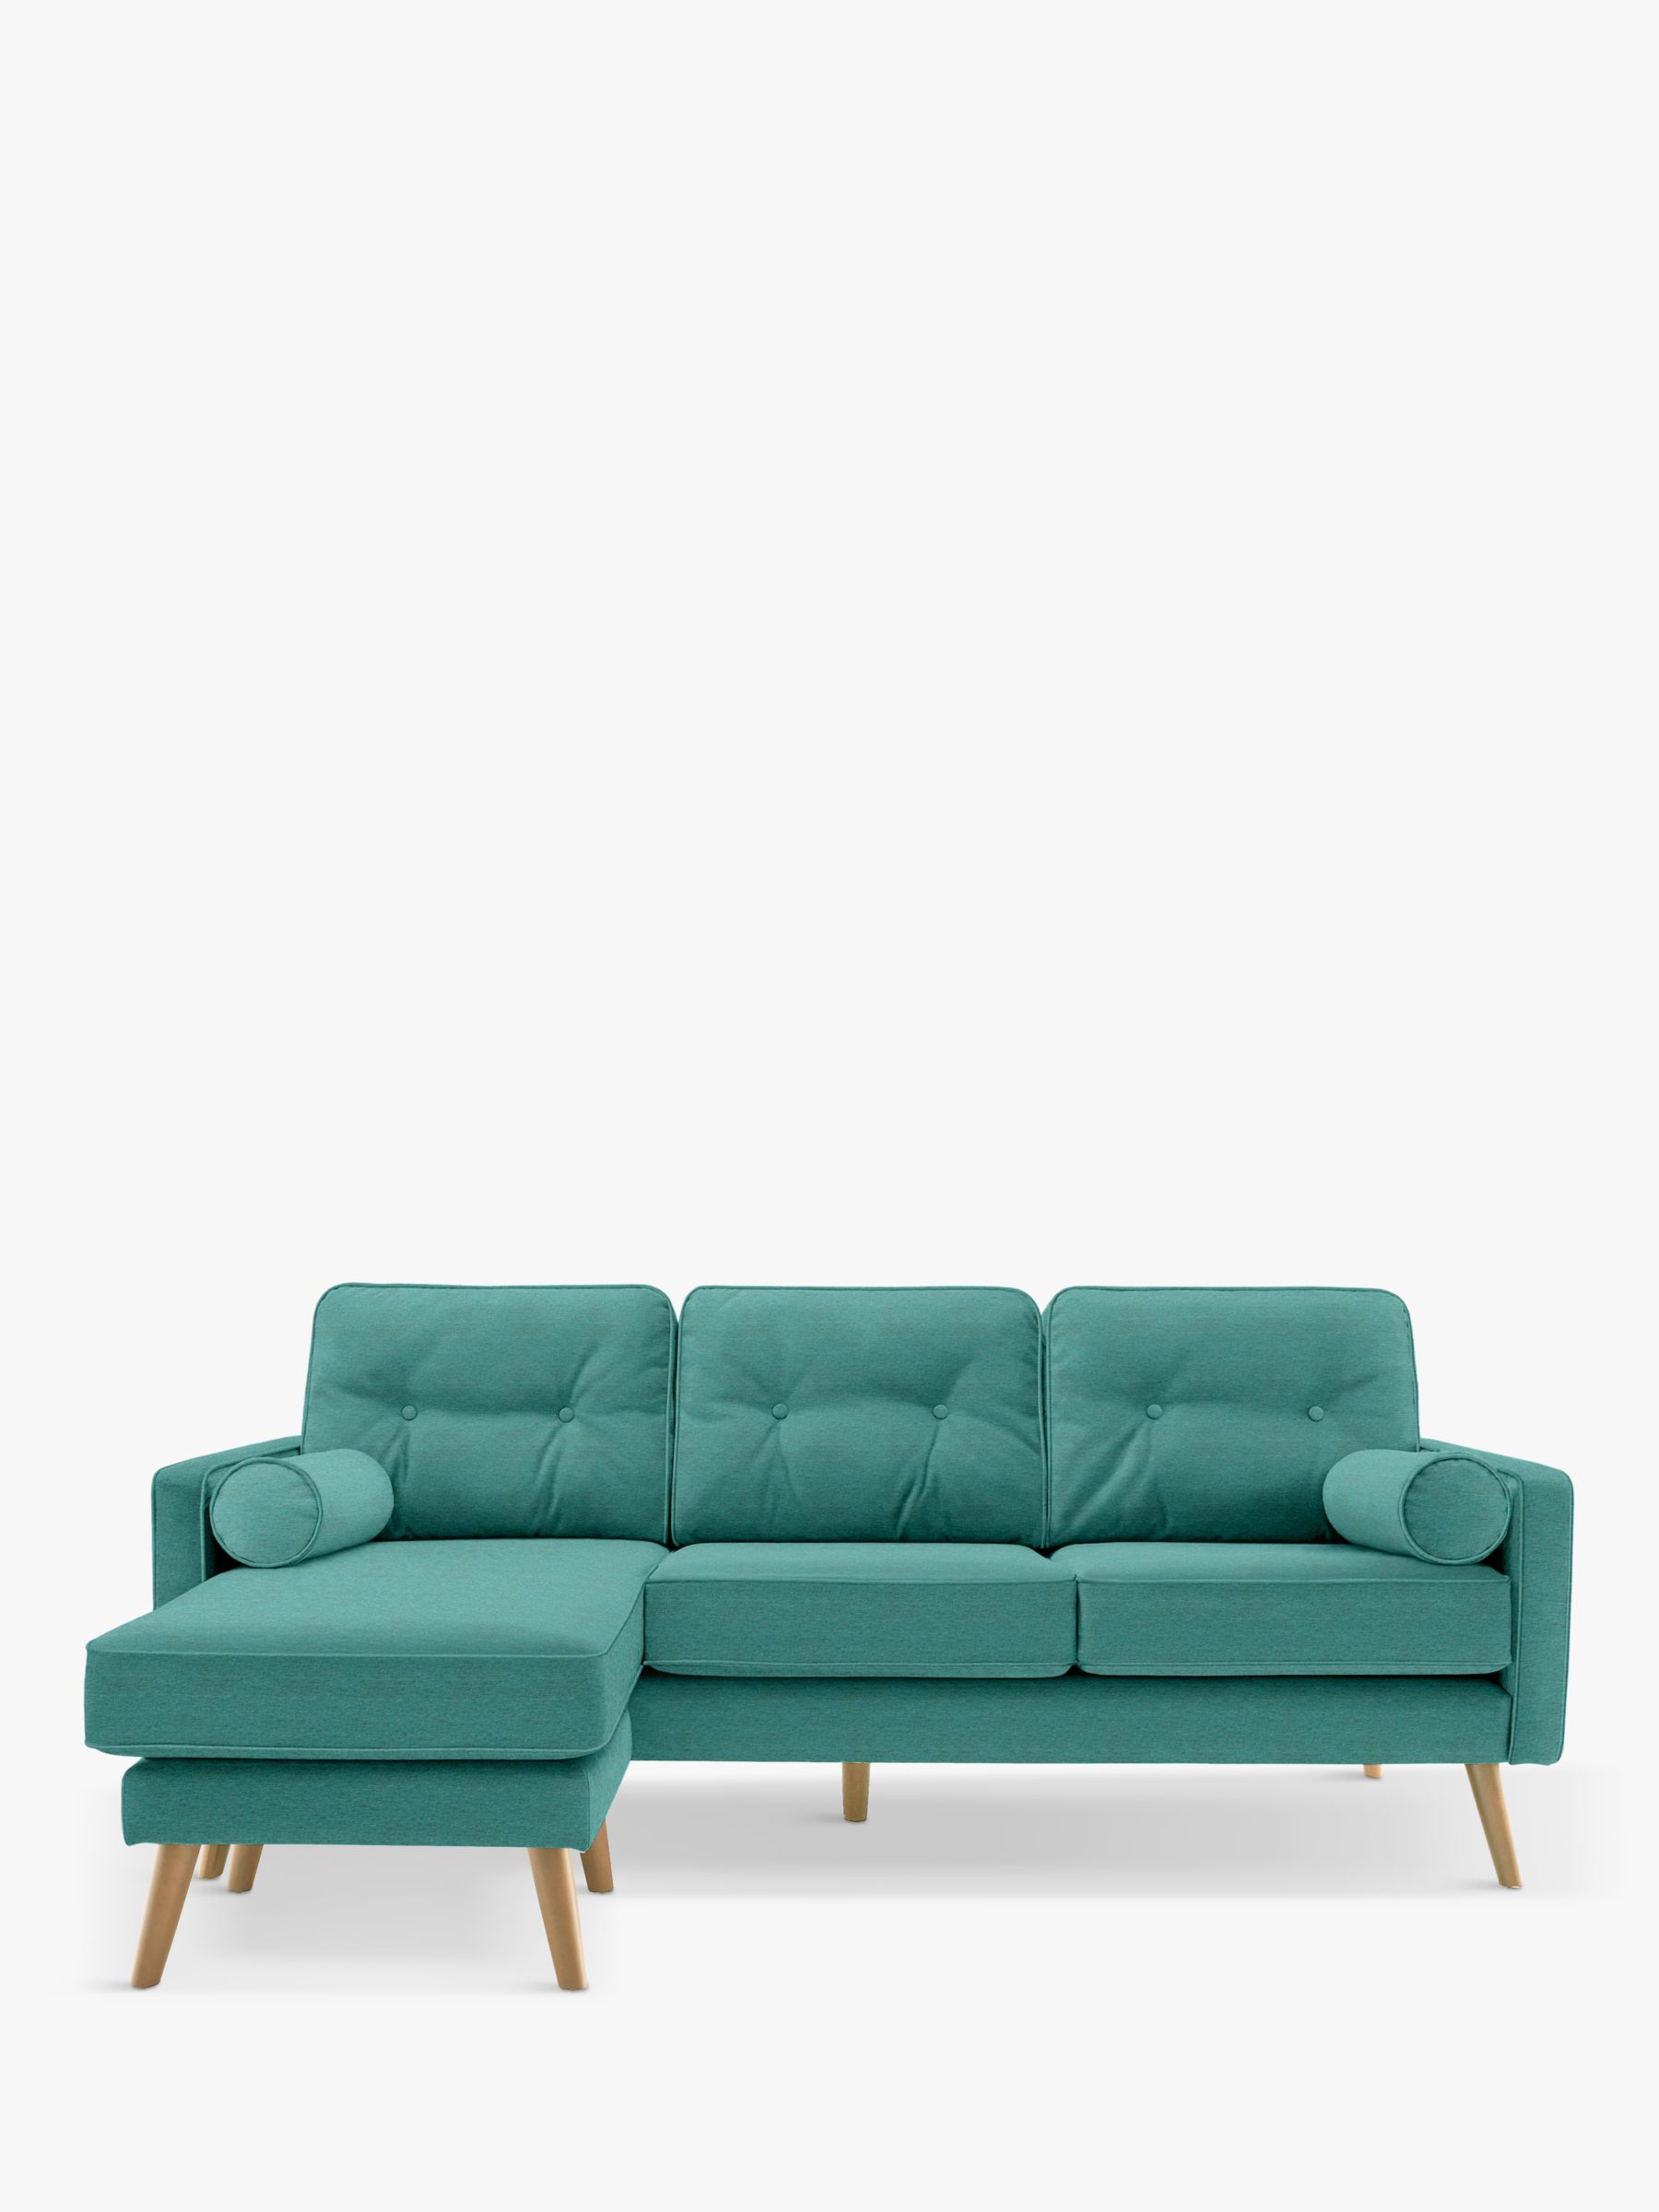 The Sixty Five Range, G Plan Vintage The Sixty Five LHF Large 3 Seater Chaise End Sofa, Fleck Blue